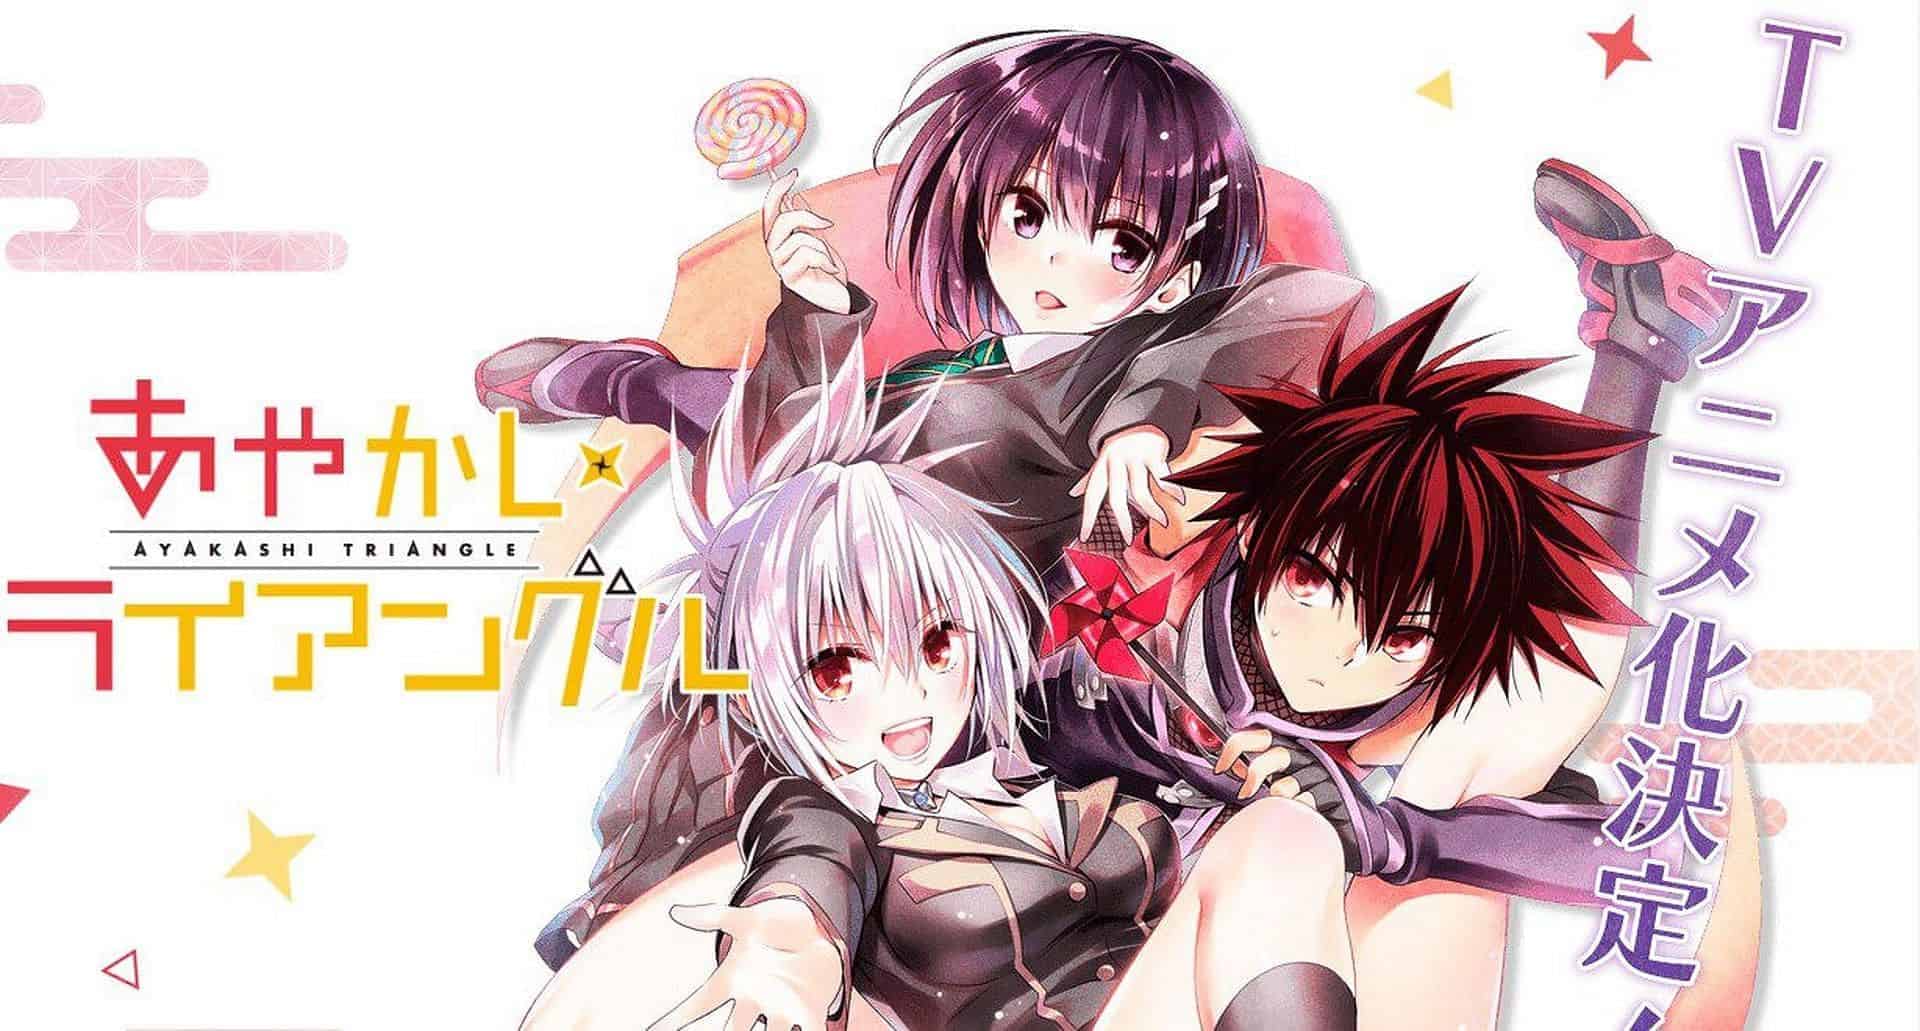 Ayakashi Triangle Chapter 138 Release Date Details